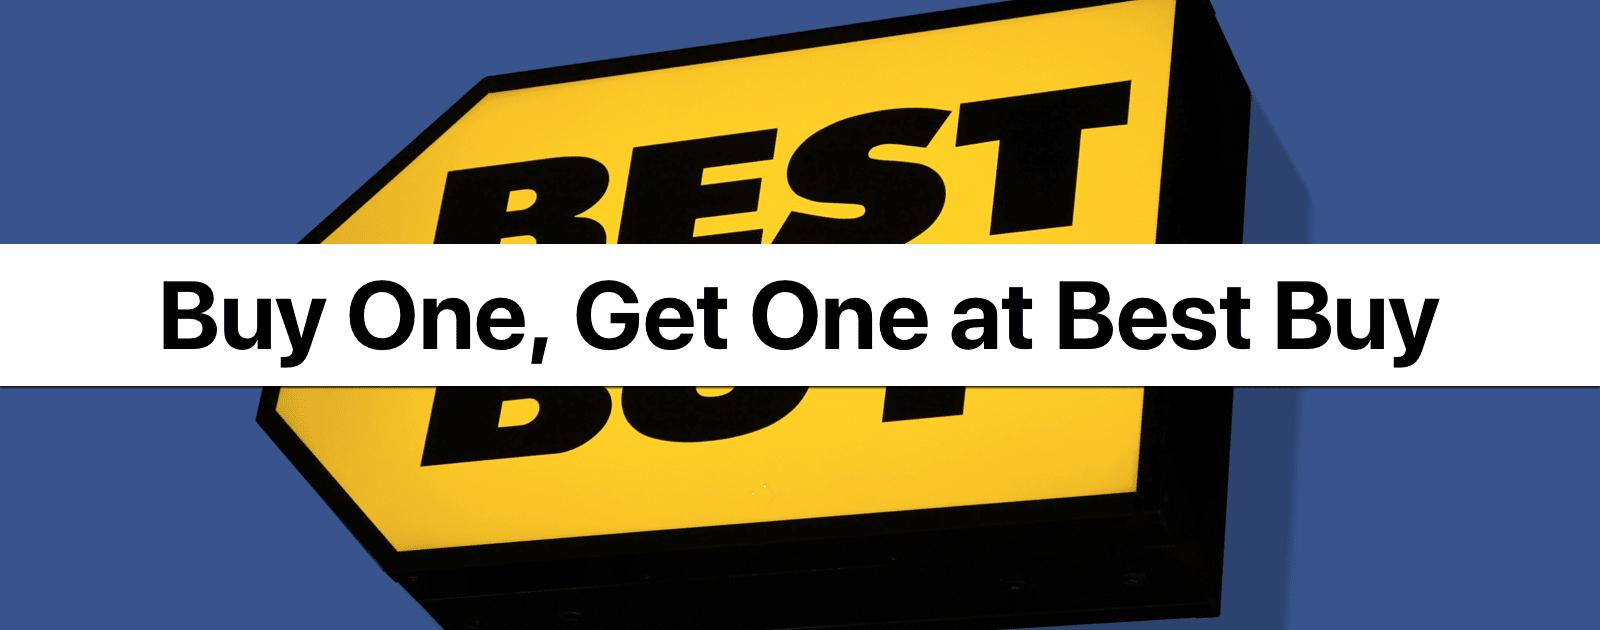 Best Buy Offers an iPhone 8 and iPhone X BOGO